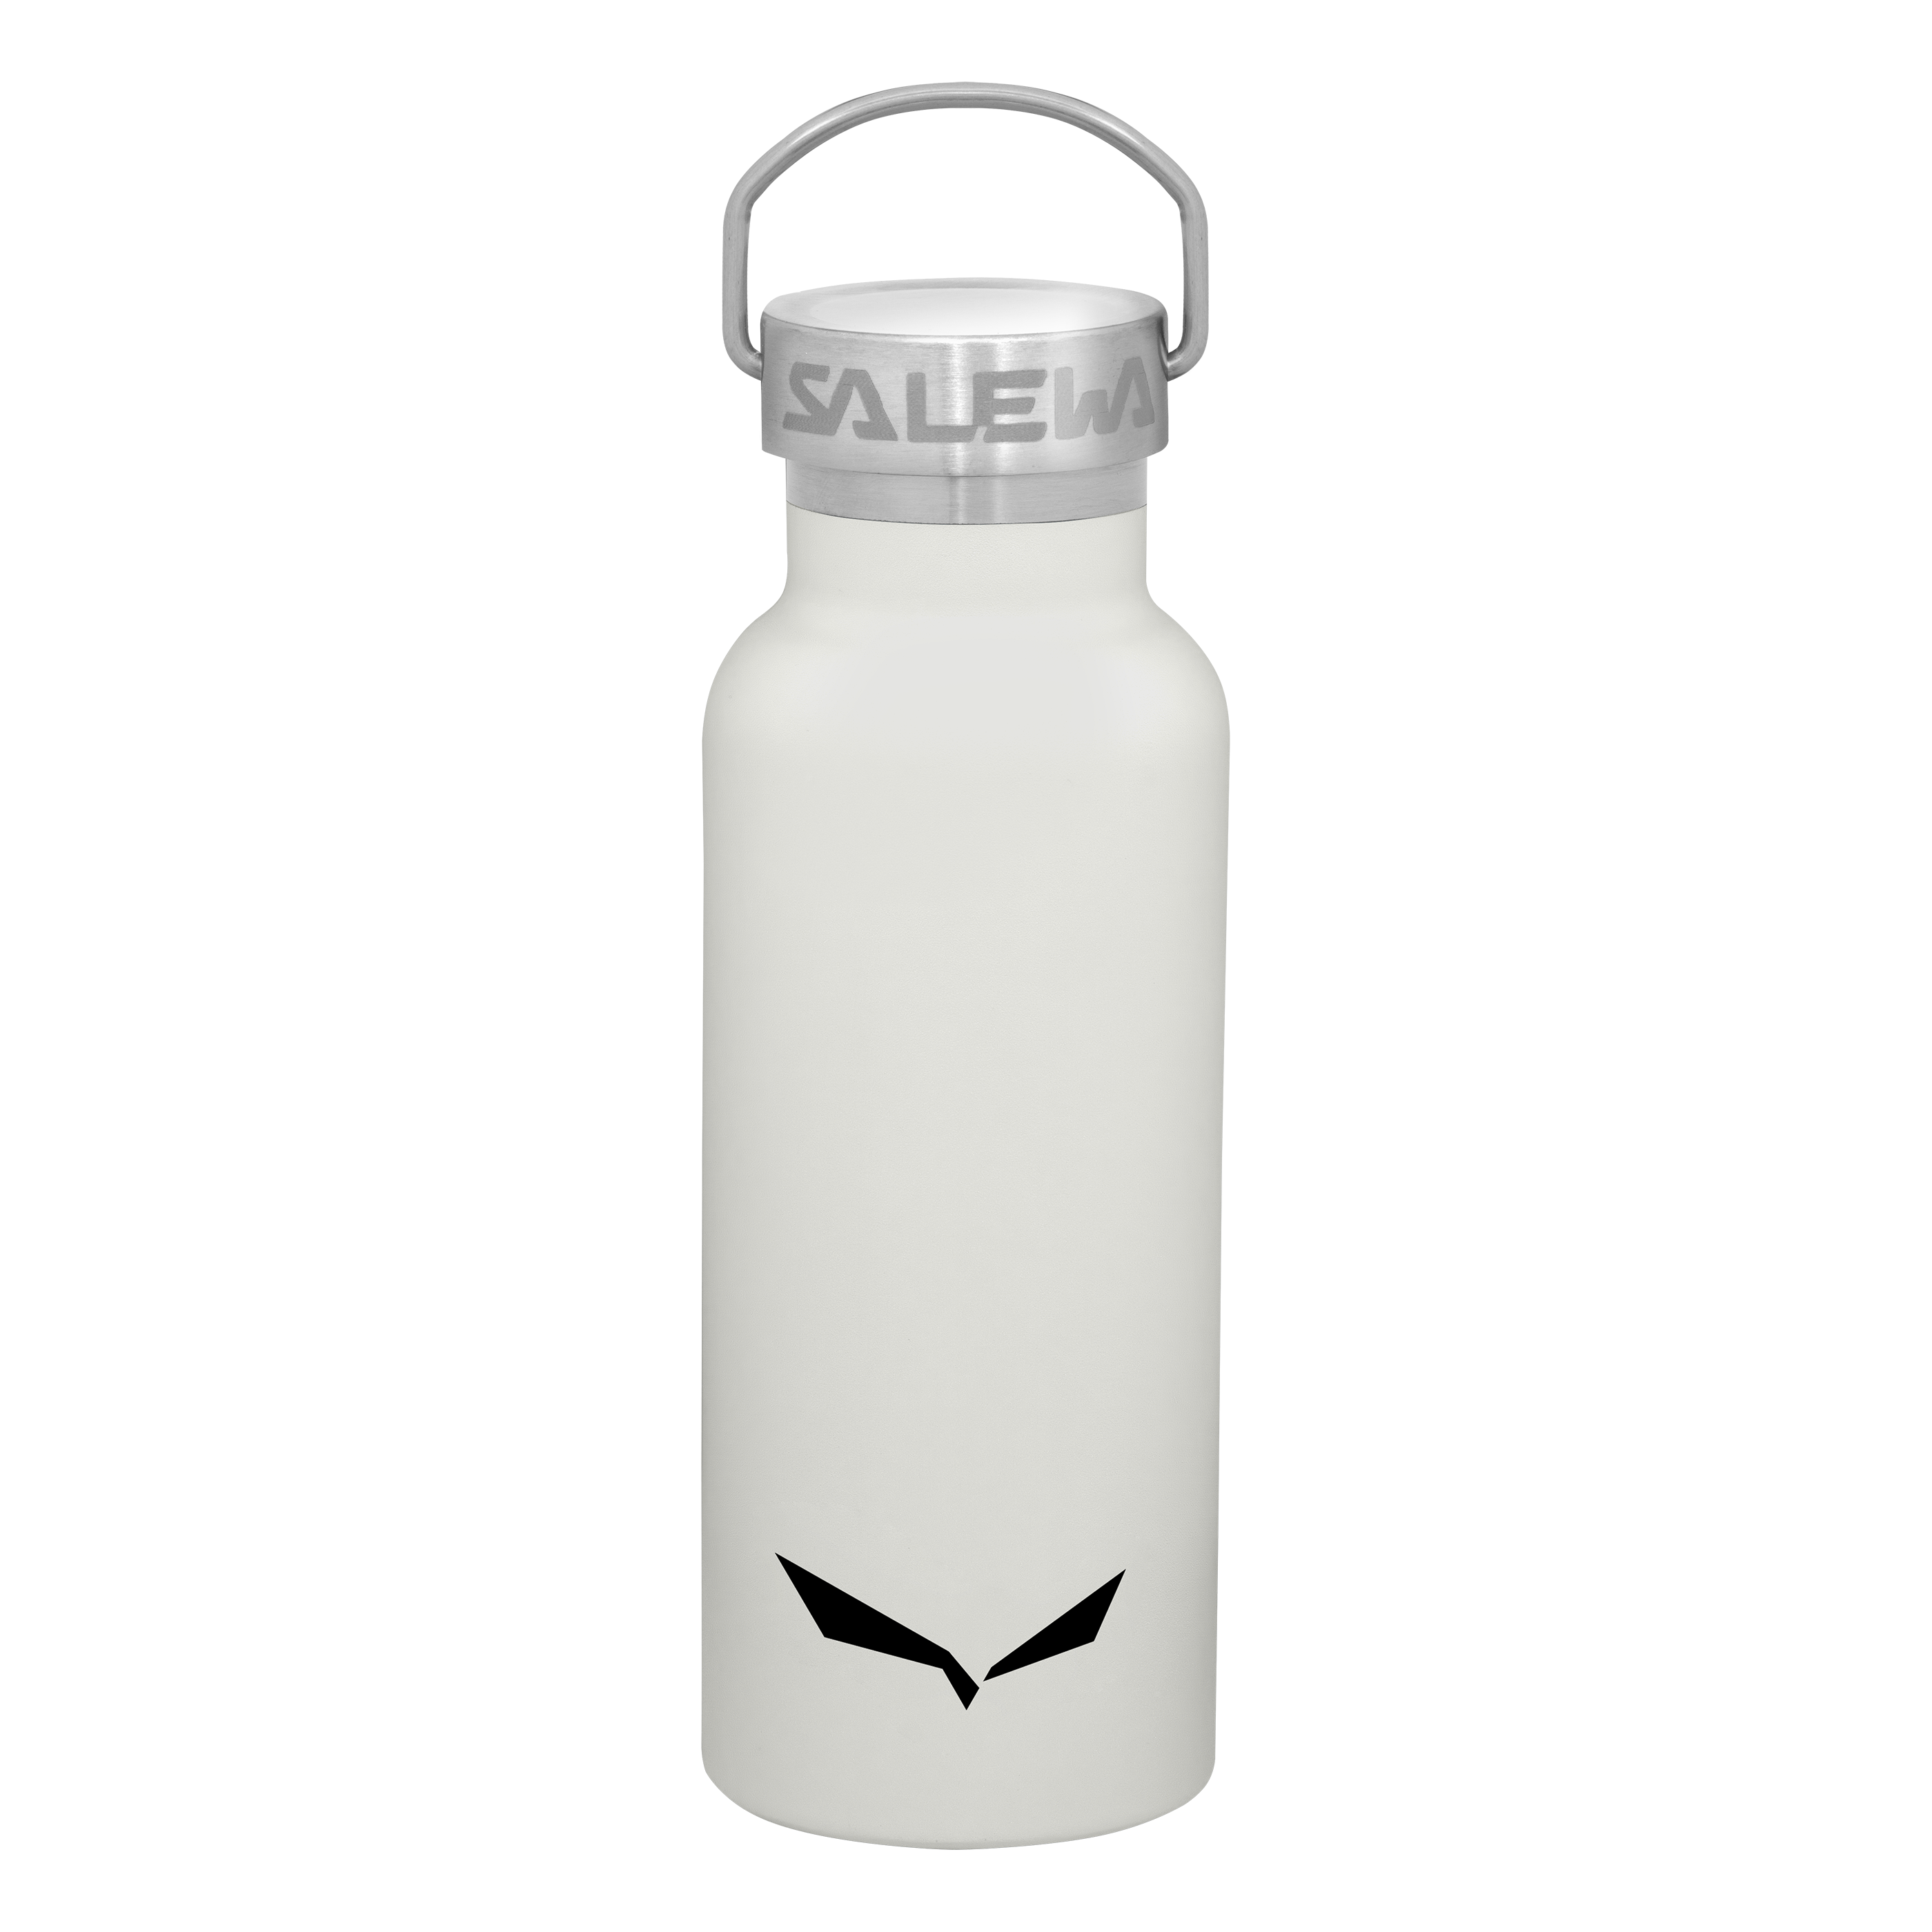 VALSURA INSULATED STAINLESS STEEL 0,45L BOTTLE